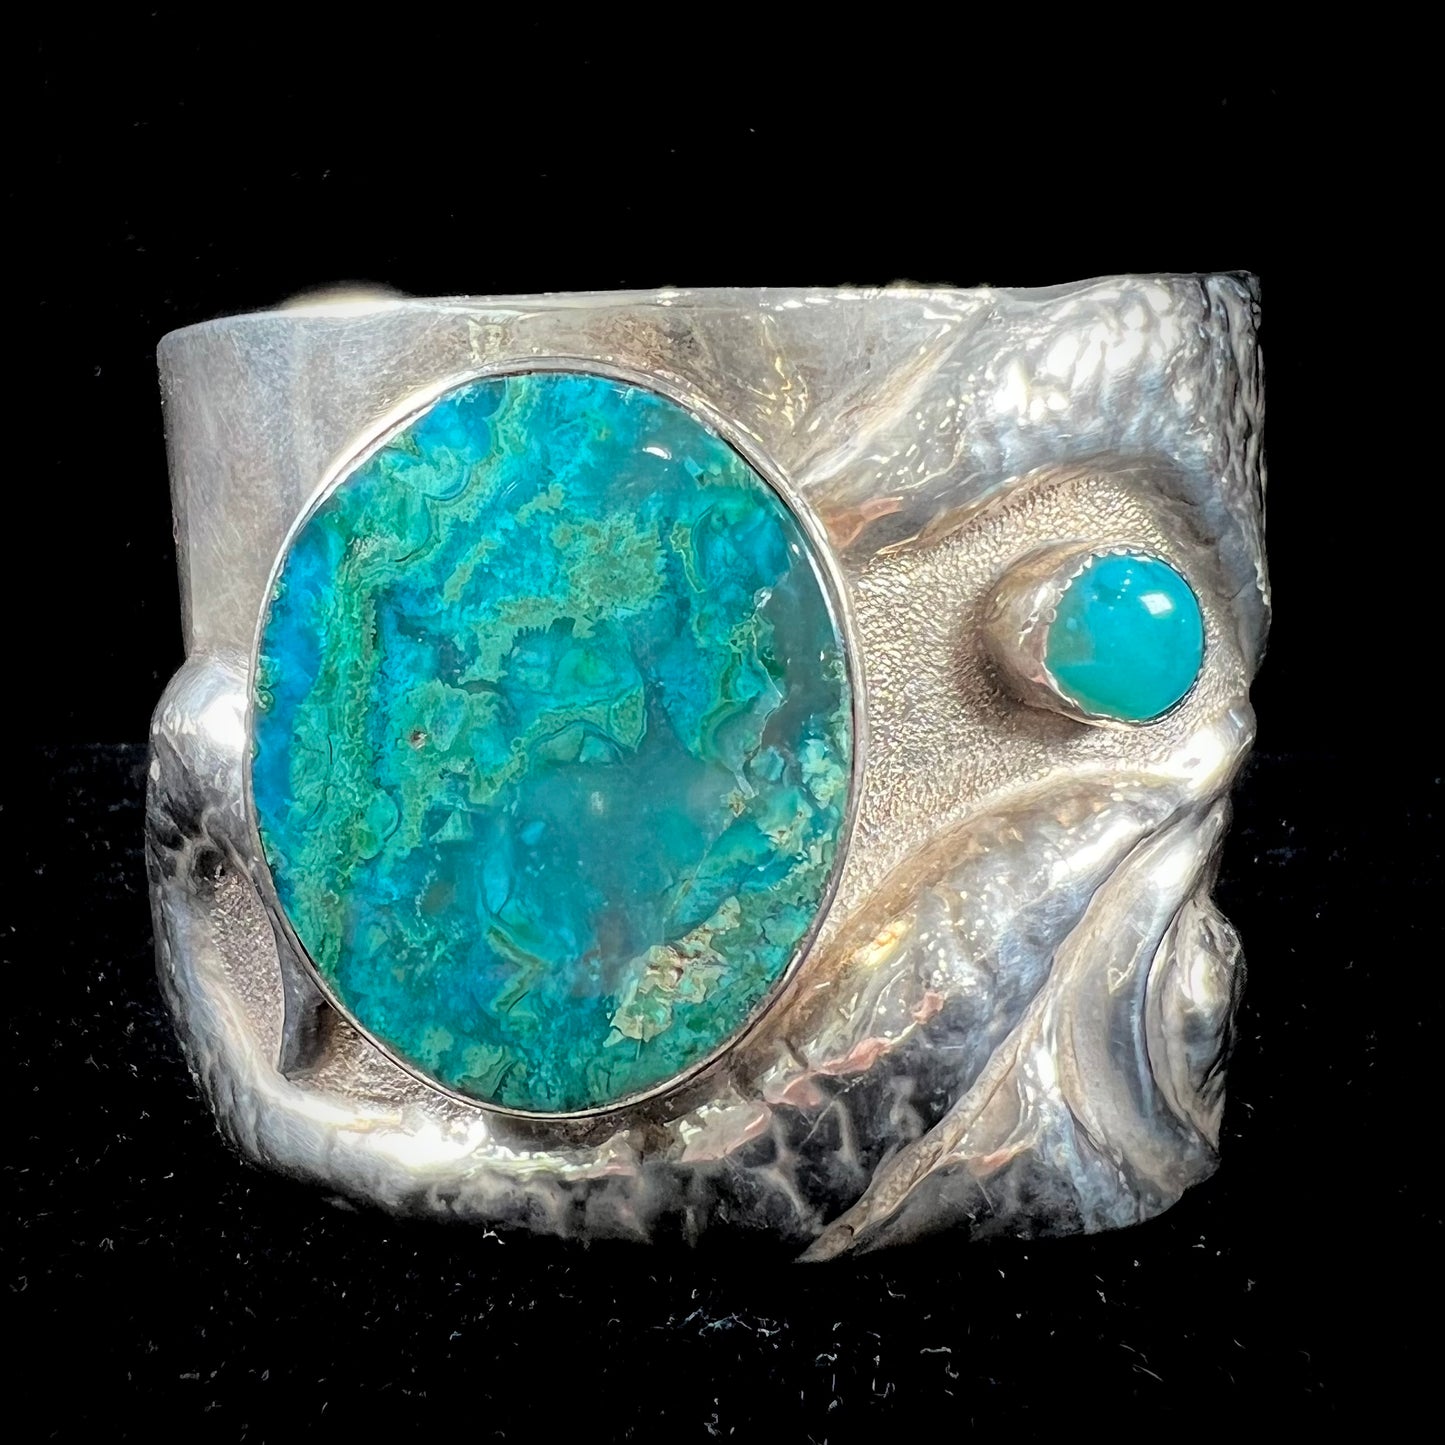 A men's sterling silver cuff bracelet set with two oval cut chrysocolla stones.